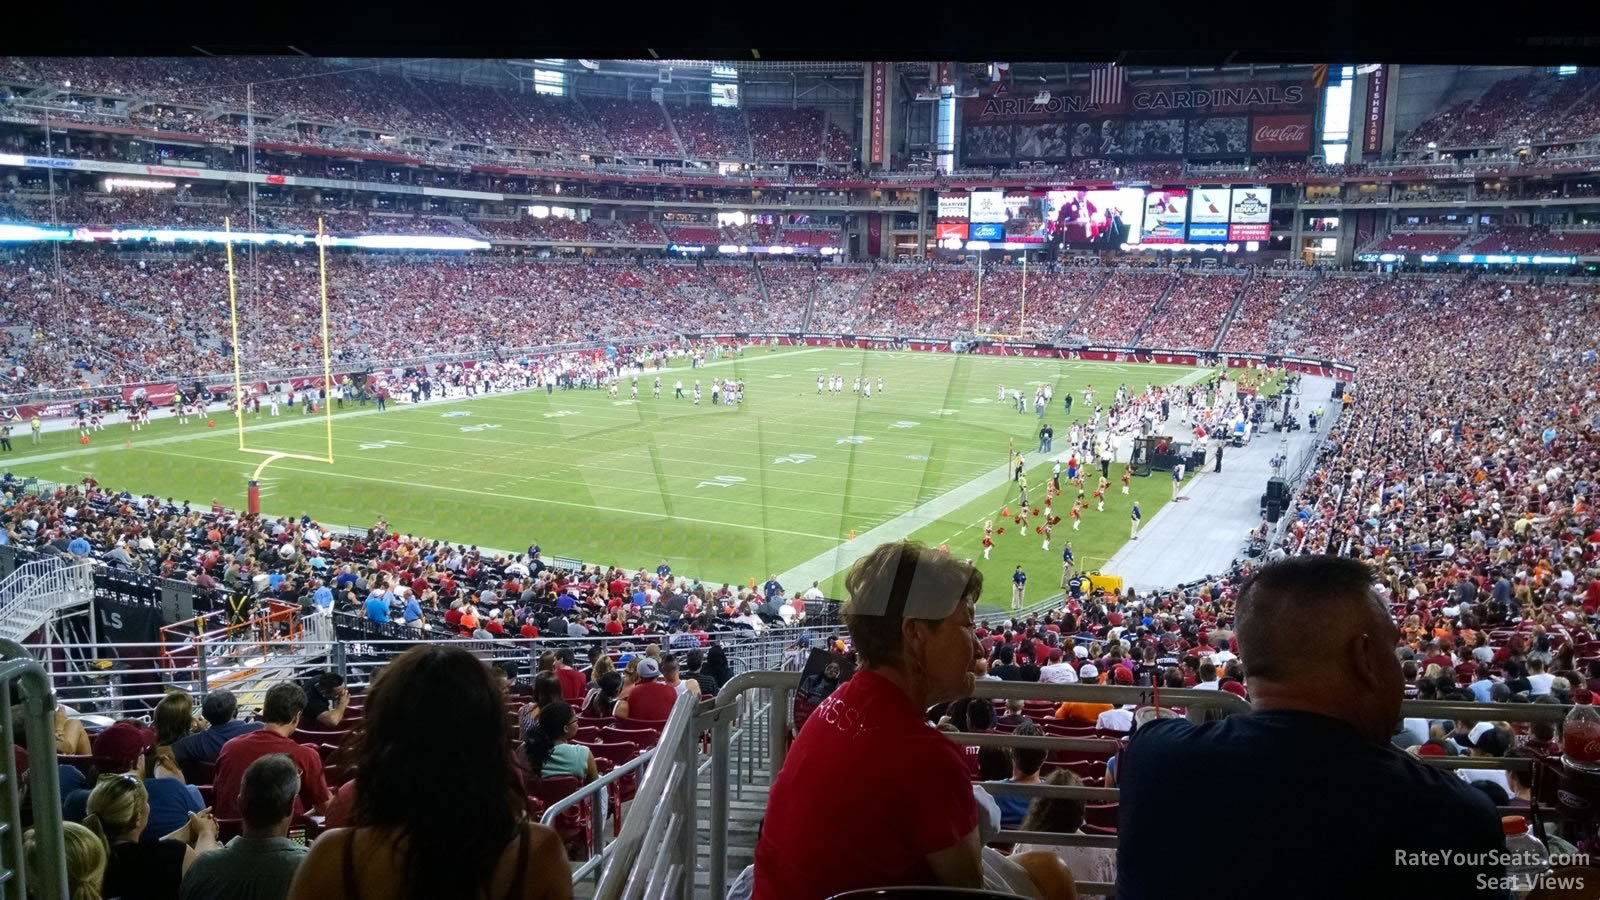 section 137, row 41 seat view  for football - state farm stadium